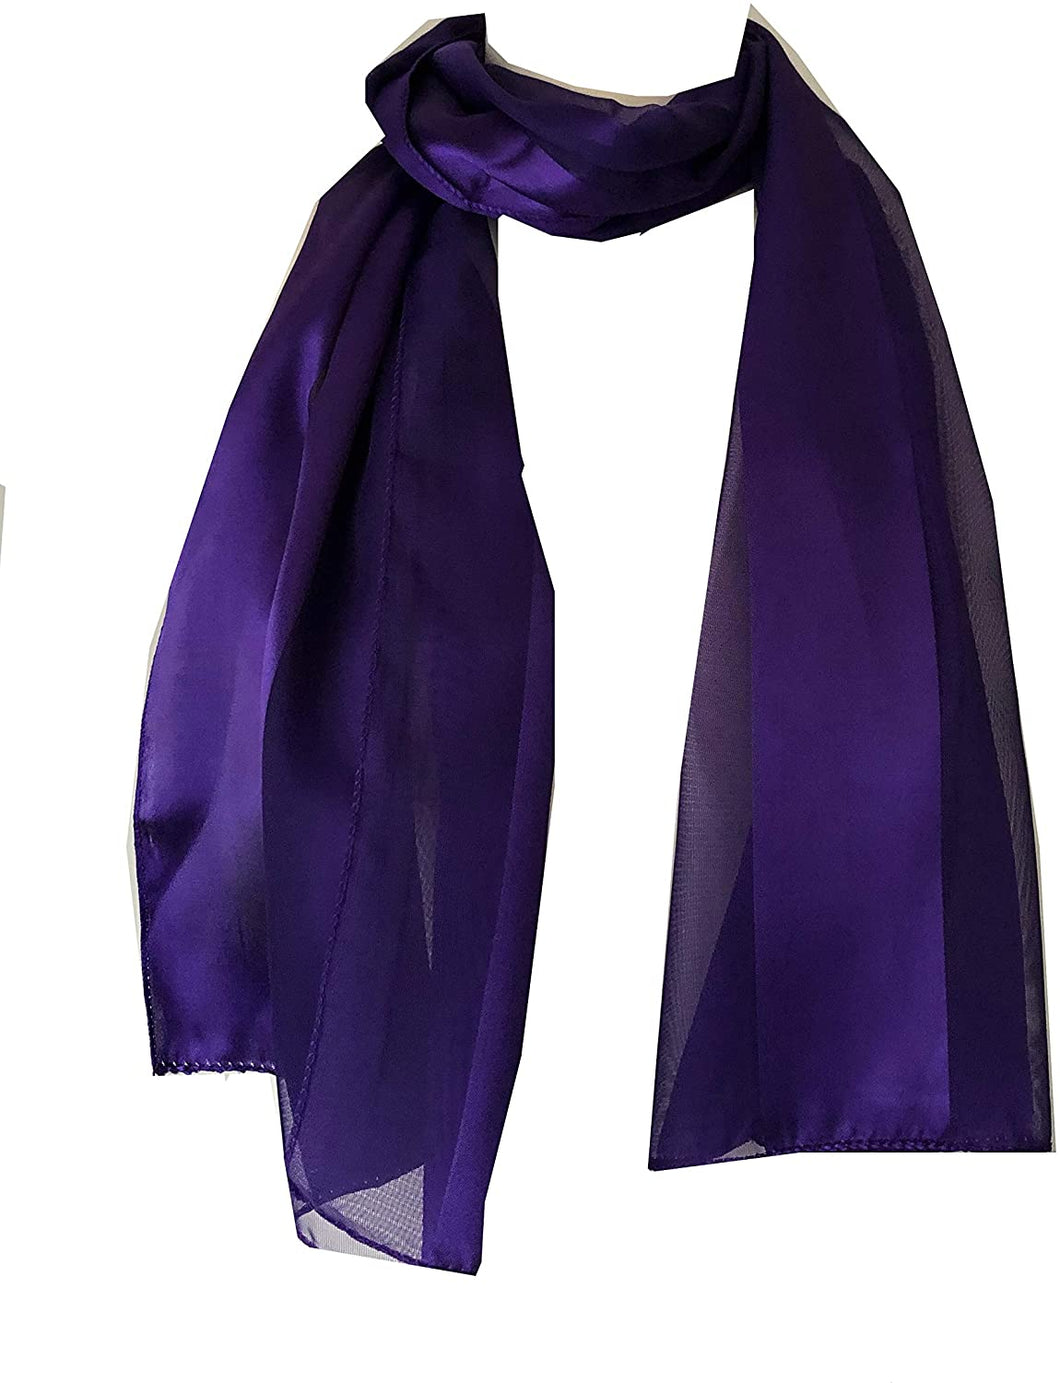 Plain Purple Faux Chiffon and Satin Style Striped Scarf Thin Pretty Scarf Great for Any Outfit